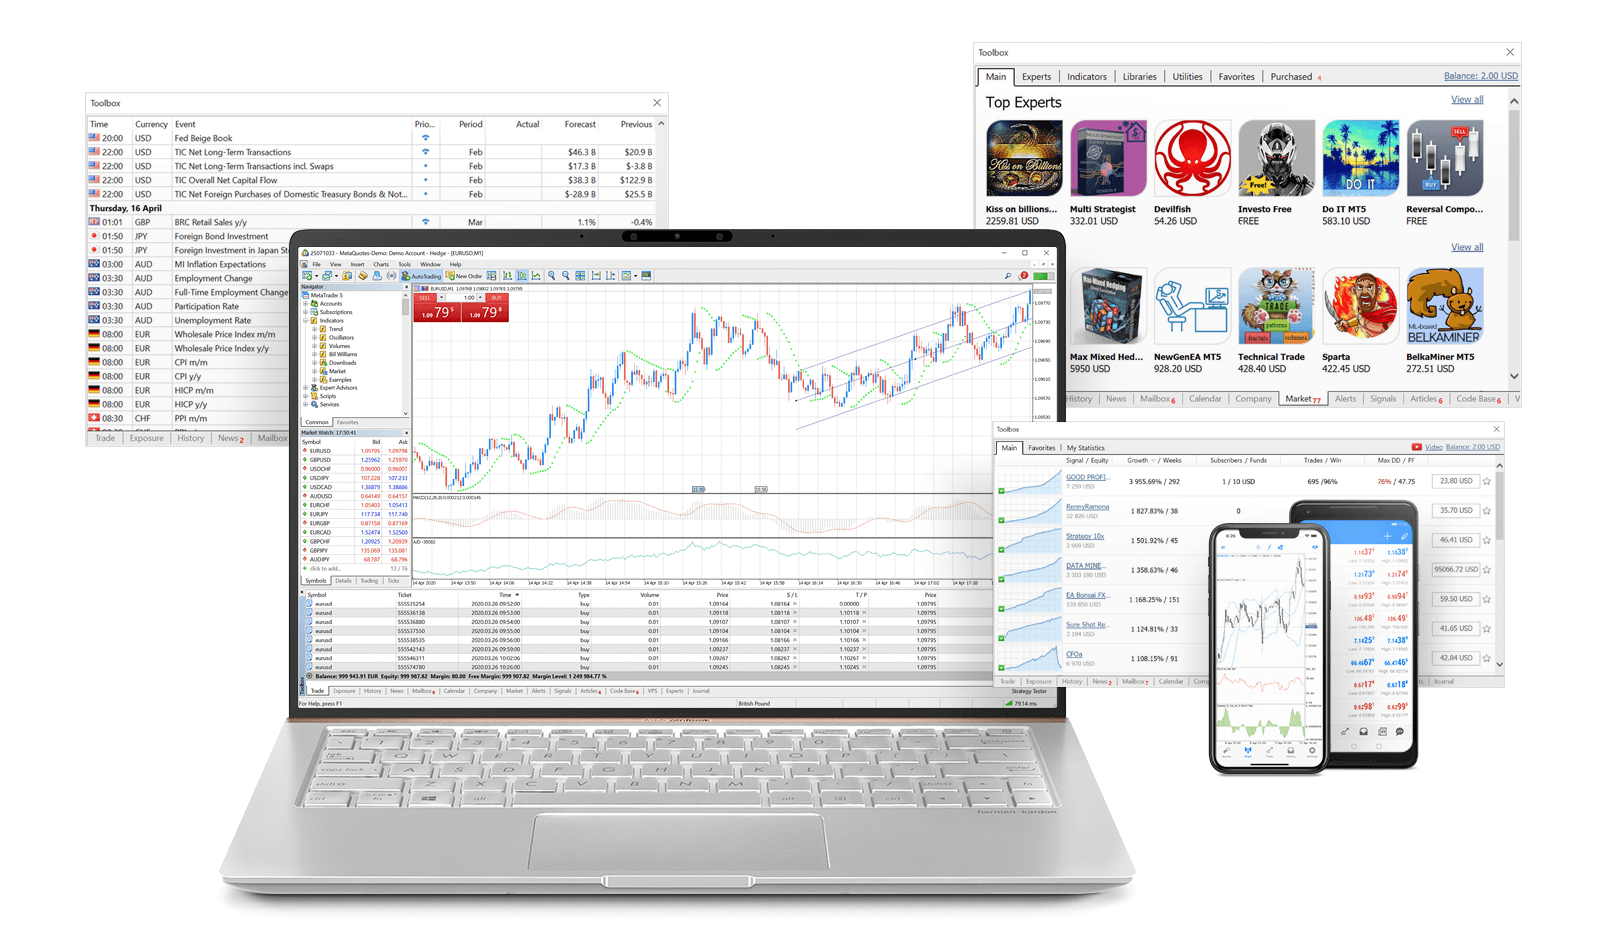 Your traders will get the best tools for analysis and trading